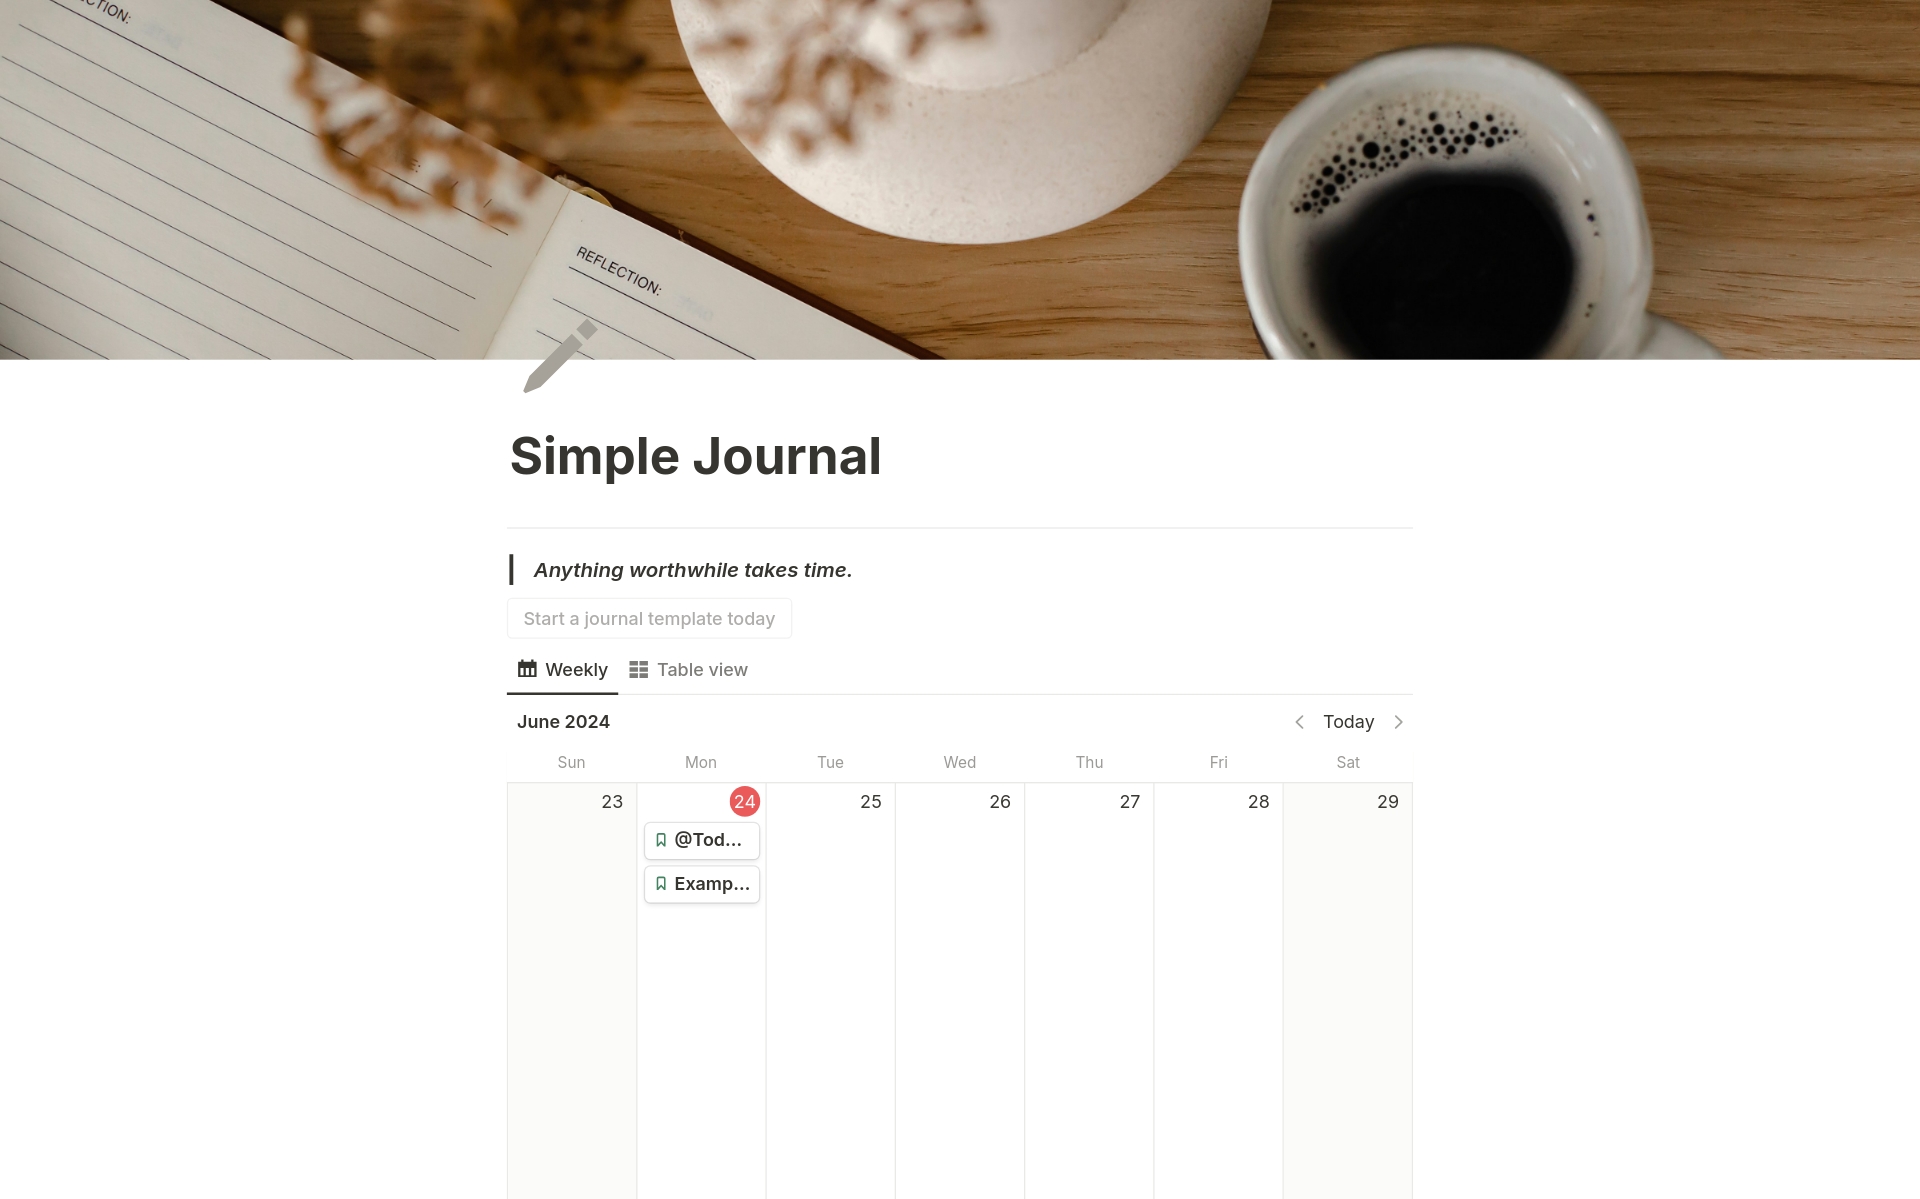 A journal dashboard that allows you to create customized journal prompts, with pre-made prompts ready for use.